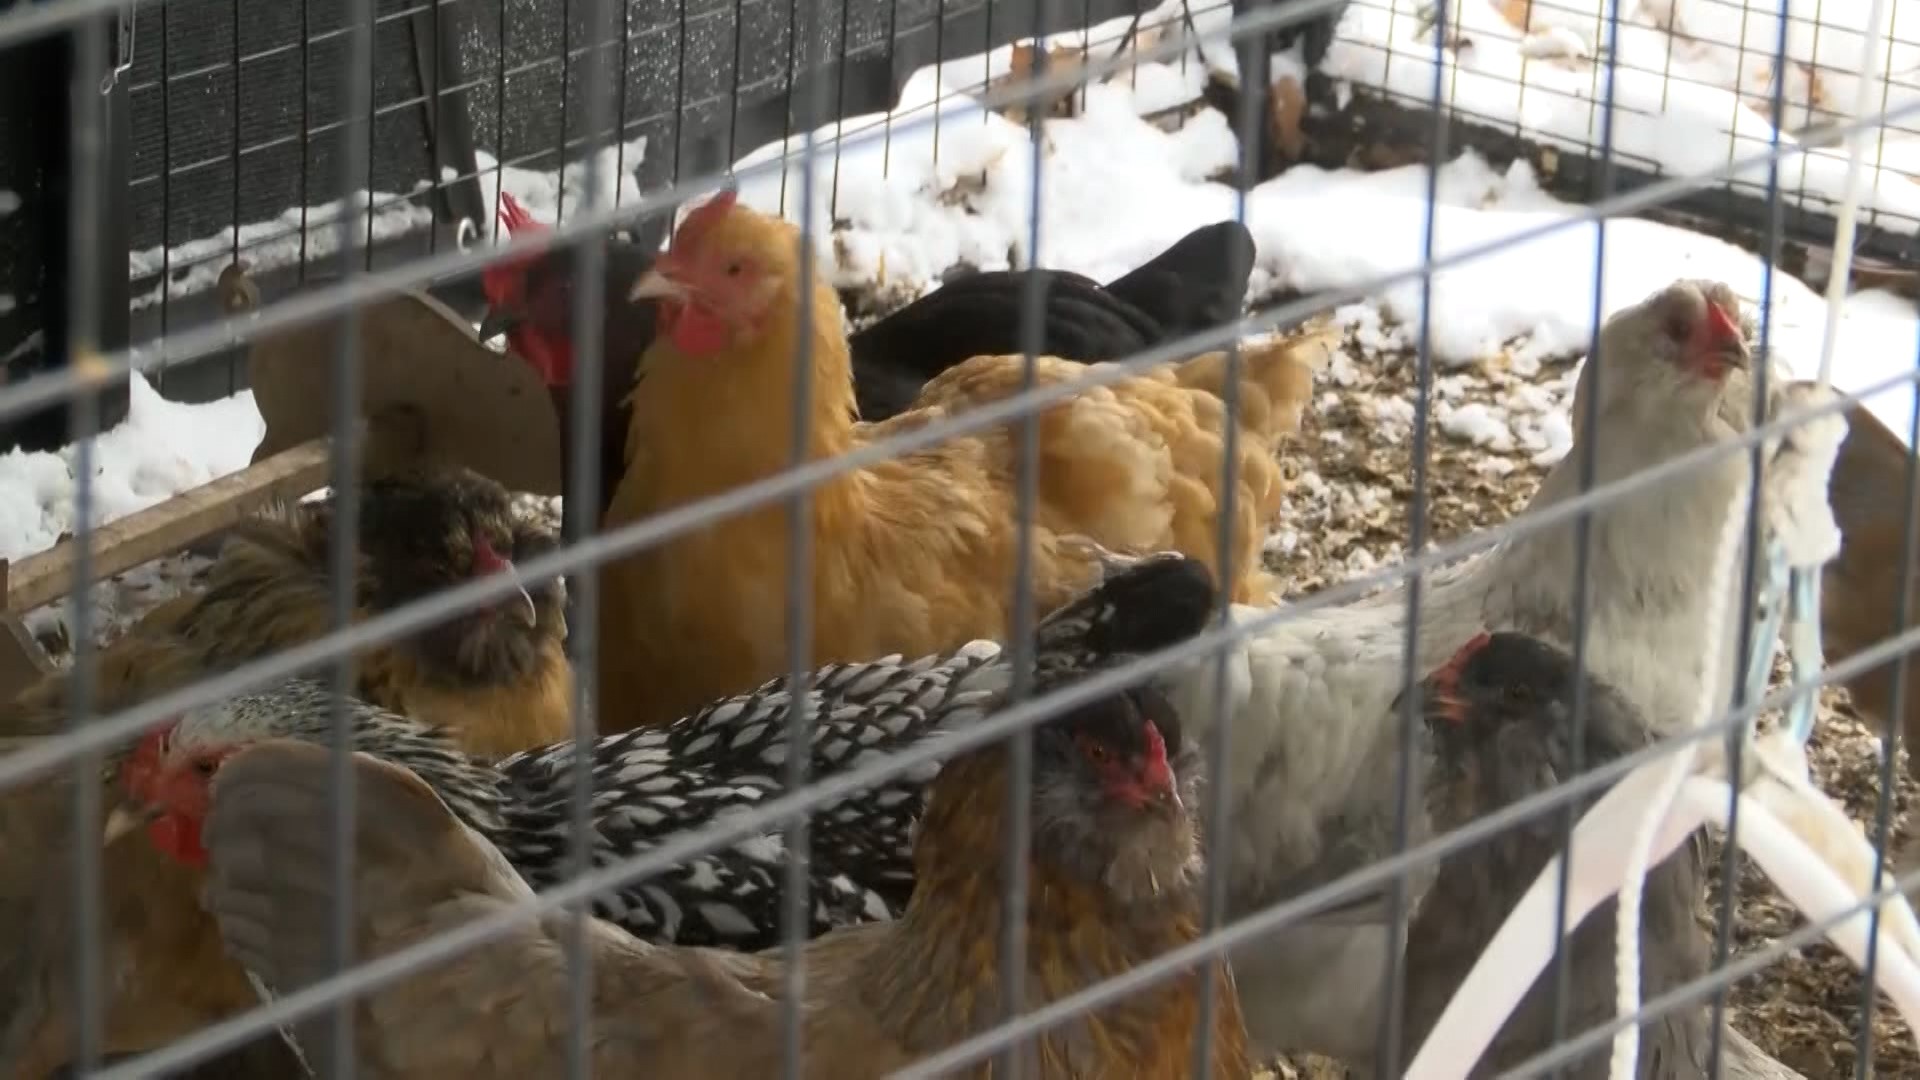 A petition asking city council to change the city code about chickens received over 300 signatures.